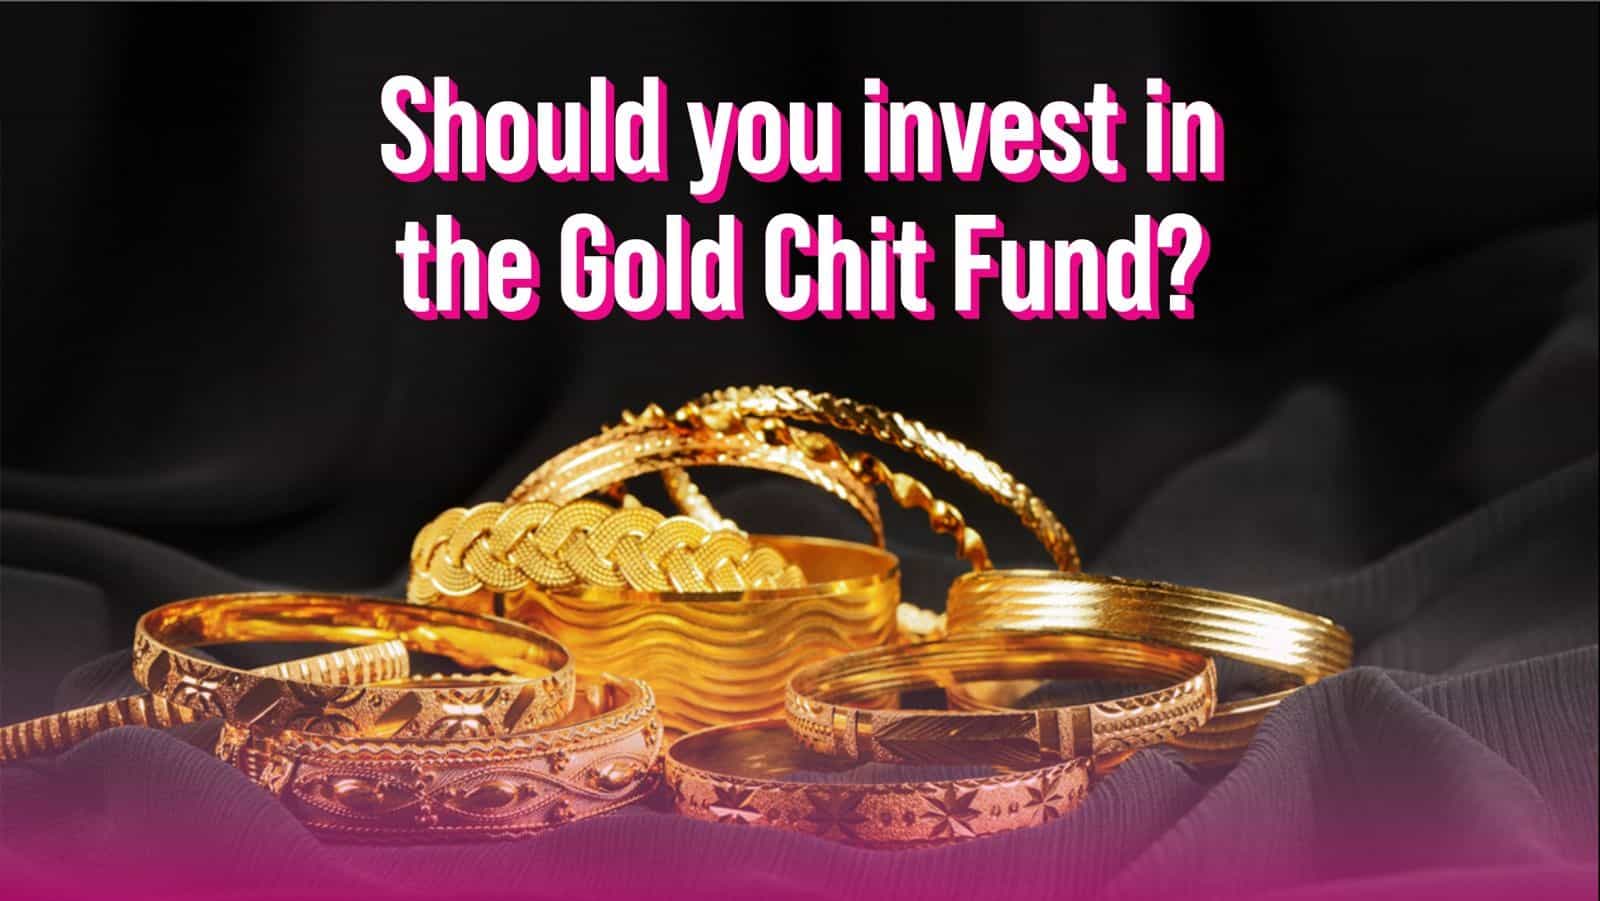 Should you invest in the Gold Chit Fund?